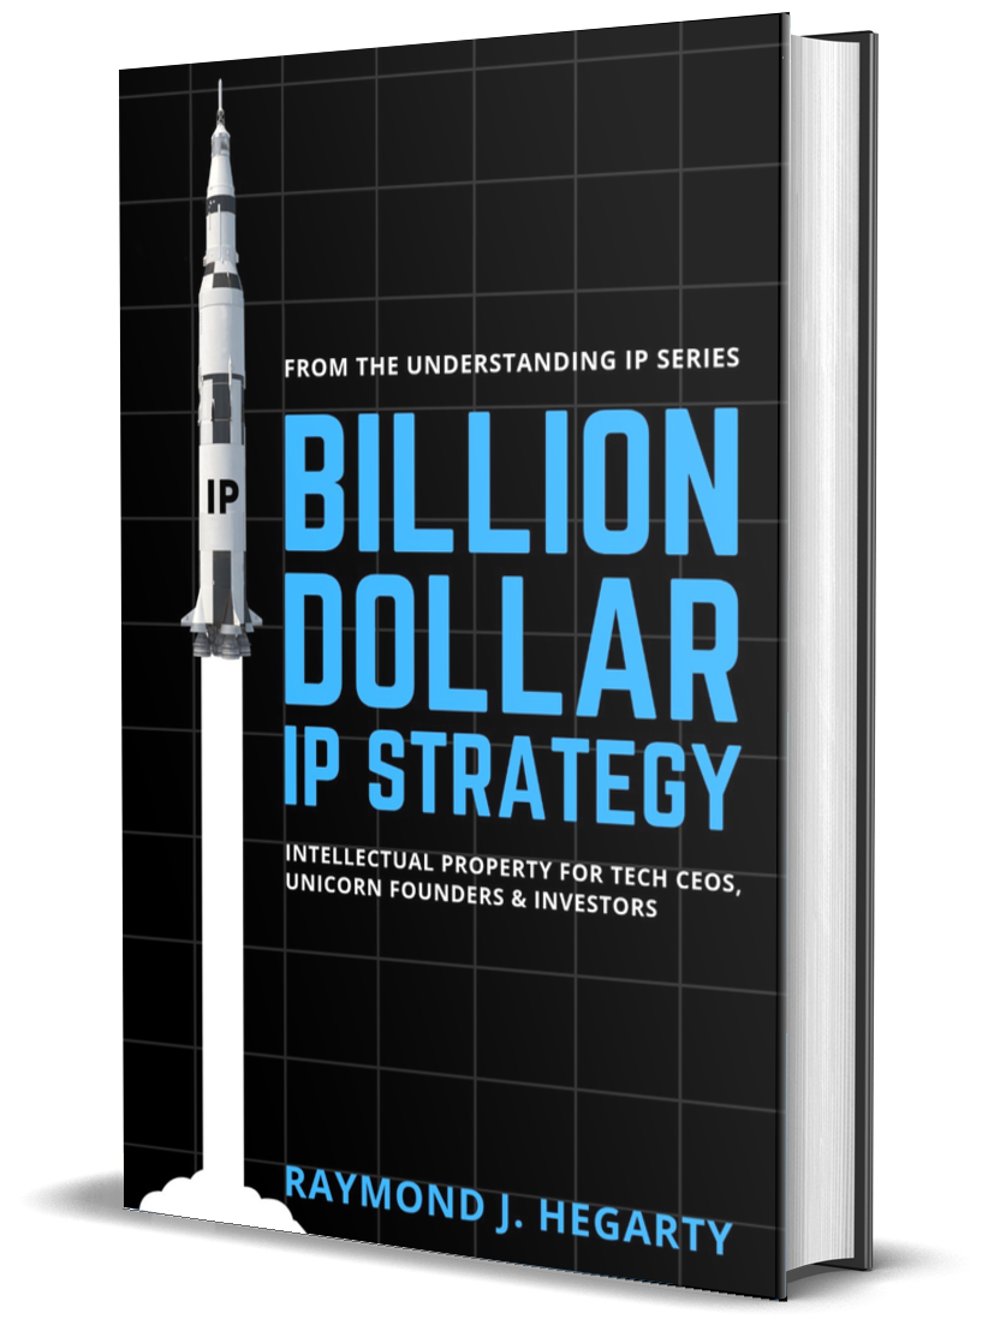 Book cover - Billion Dollar IP Strategy - IP strategy book by Raymond Hegarty